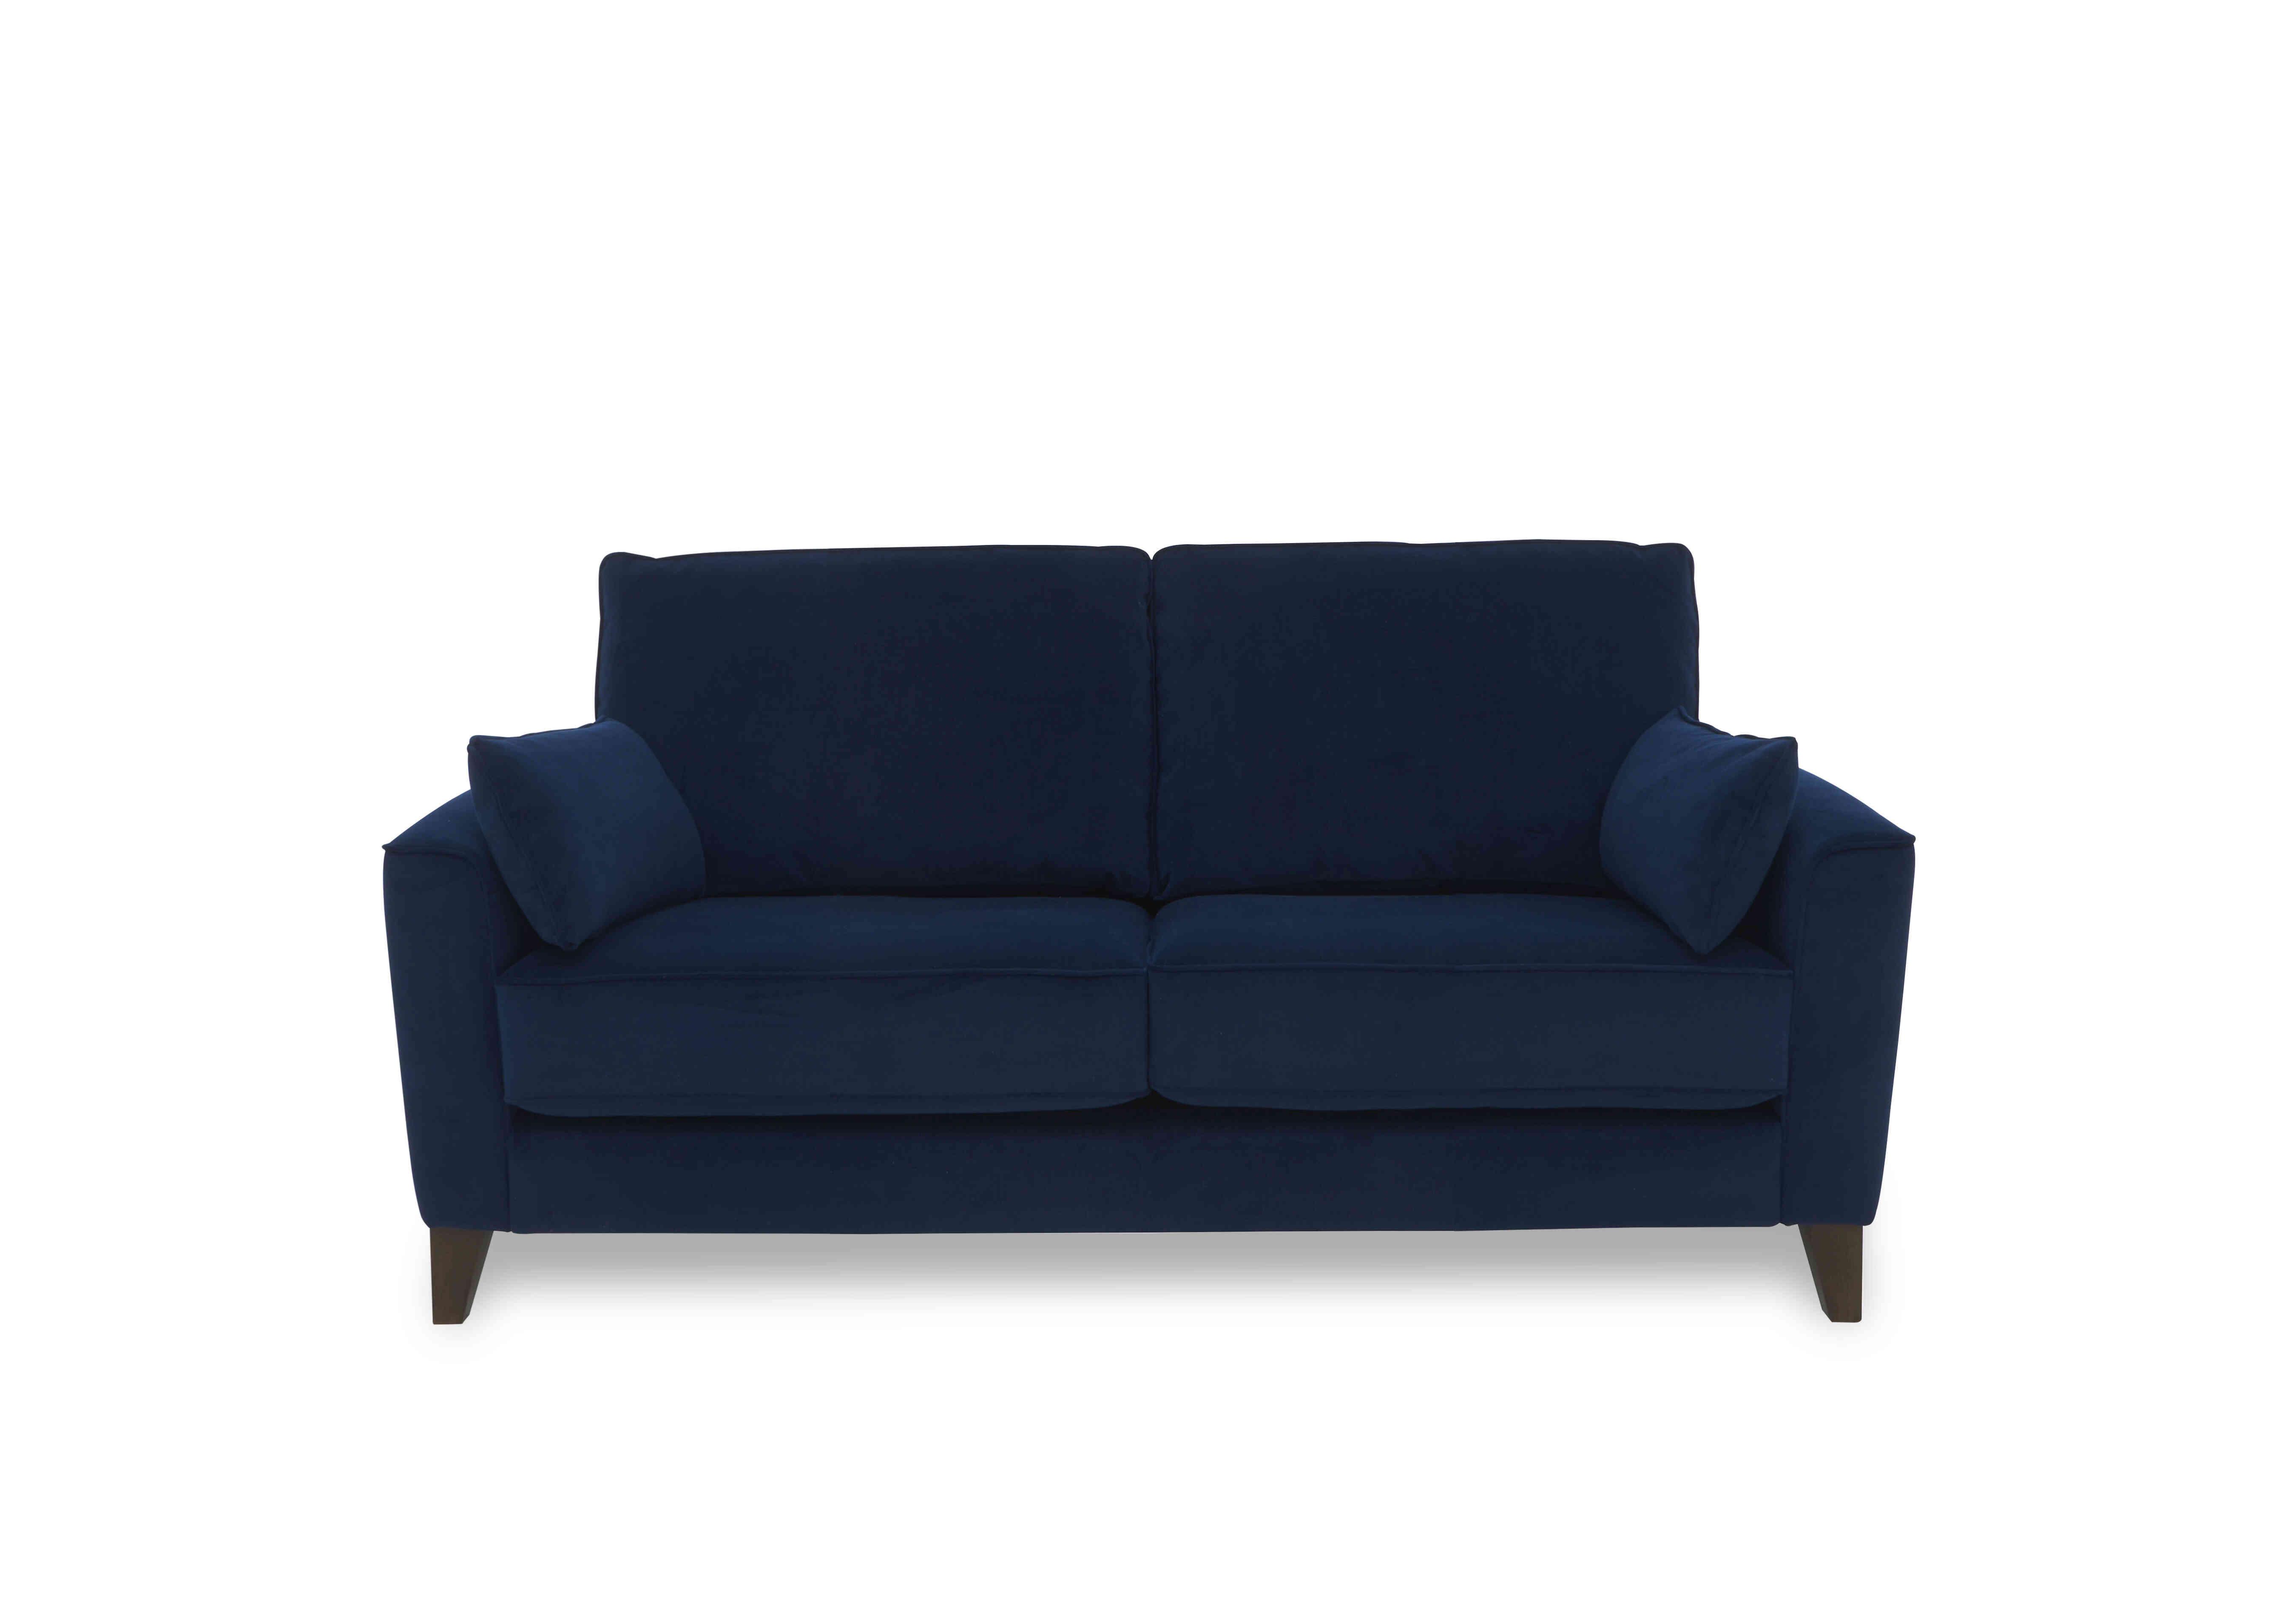 Brondby 2 Seater Fabric Sofa in Fab-Meg-R28 Navy on Furniture Village